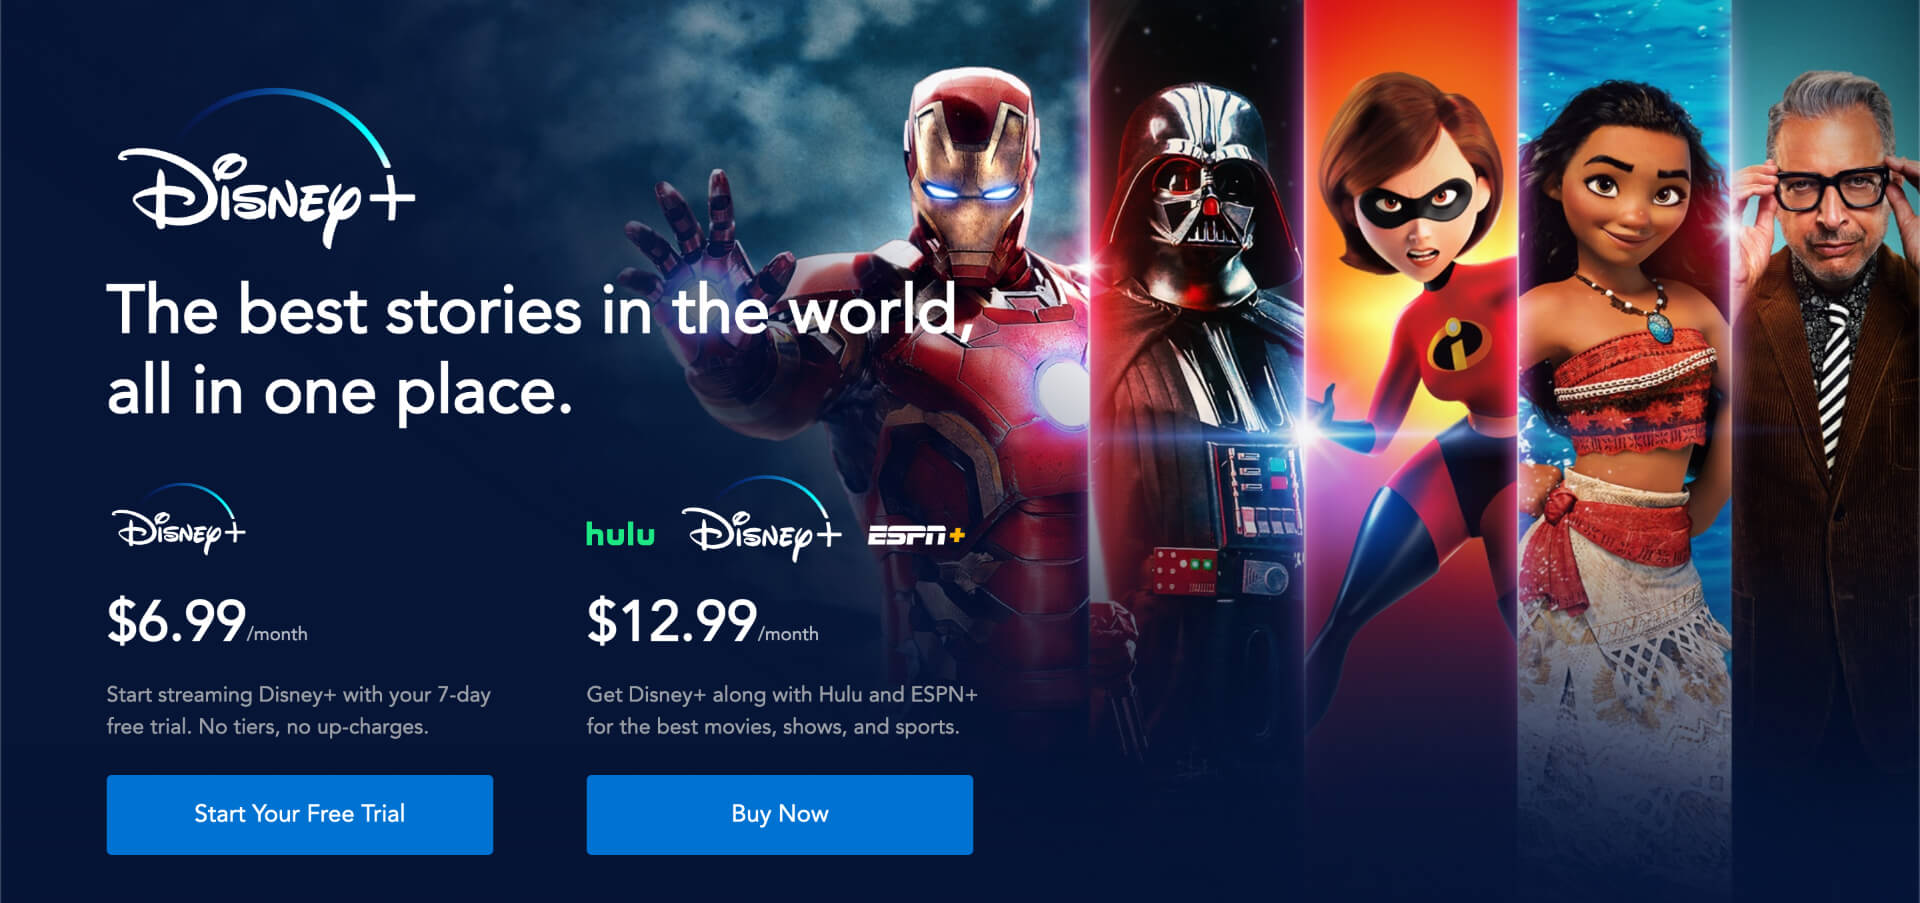 How Much Is Disney Plus with Hulu?